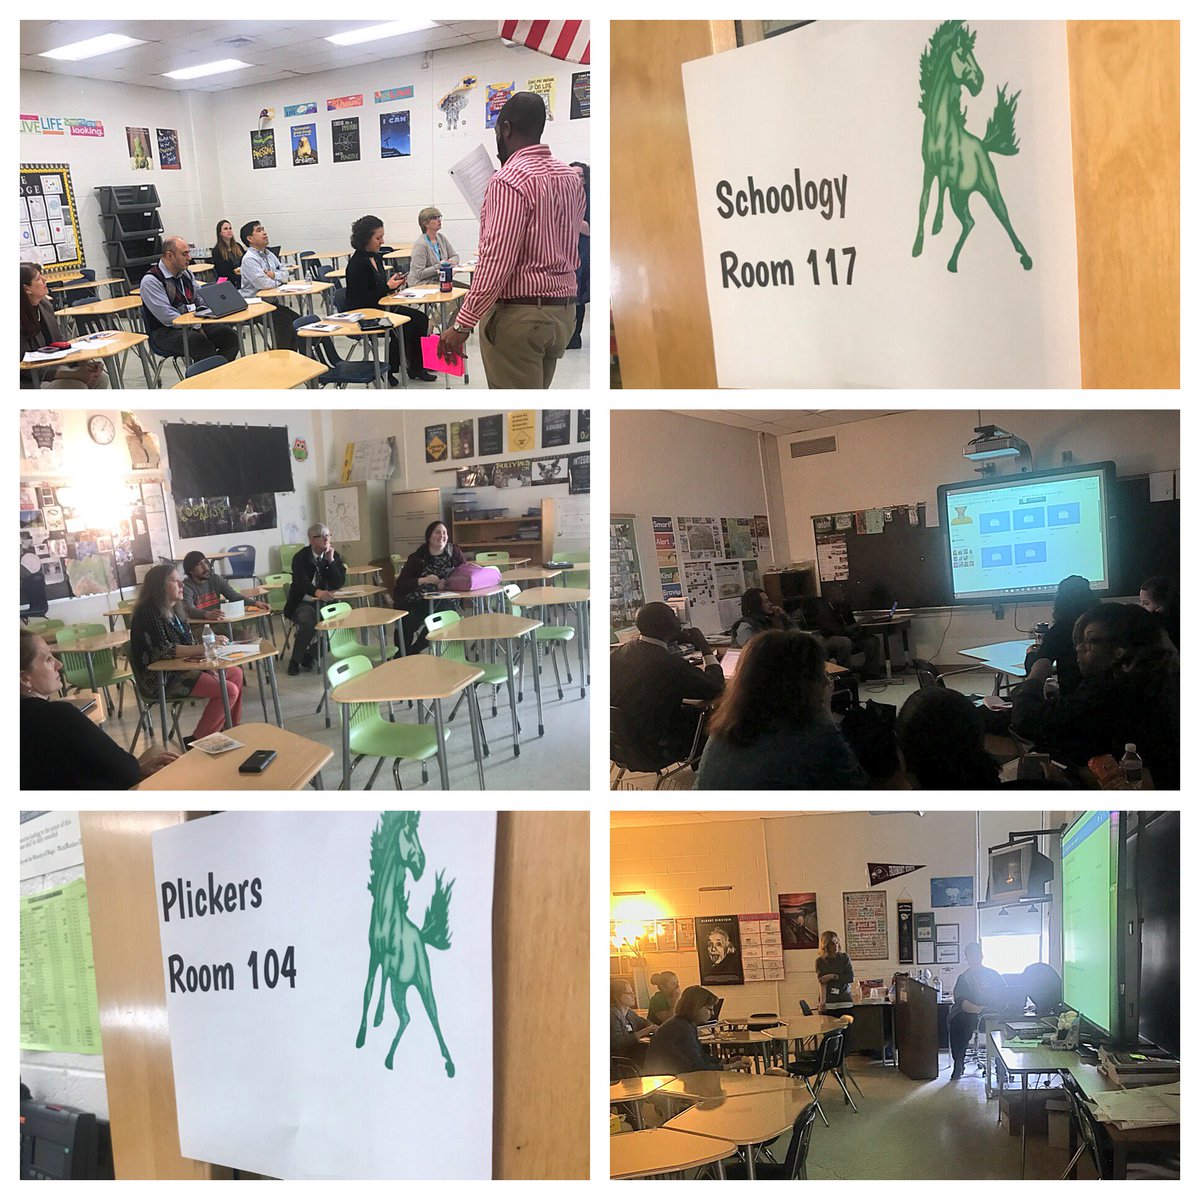 We had an awesome time “EdCamping” today on campus!  Tons of great takeaways on using tech tools to increase opportunities to respond during instruction and increase student engagement. Thank you @MissCoates_PBIS 😊  #PBIS  #weareGR  #StallionPride 💚💙🐴